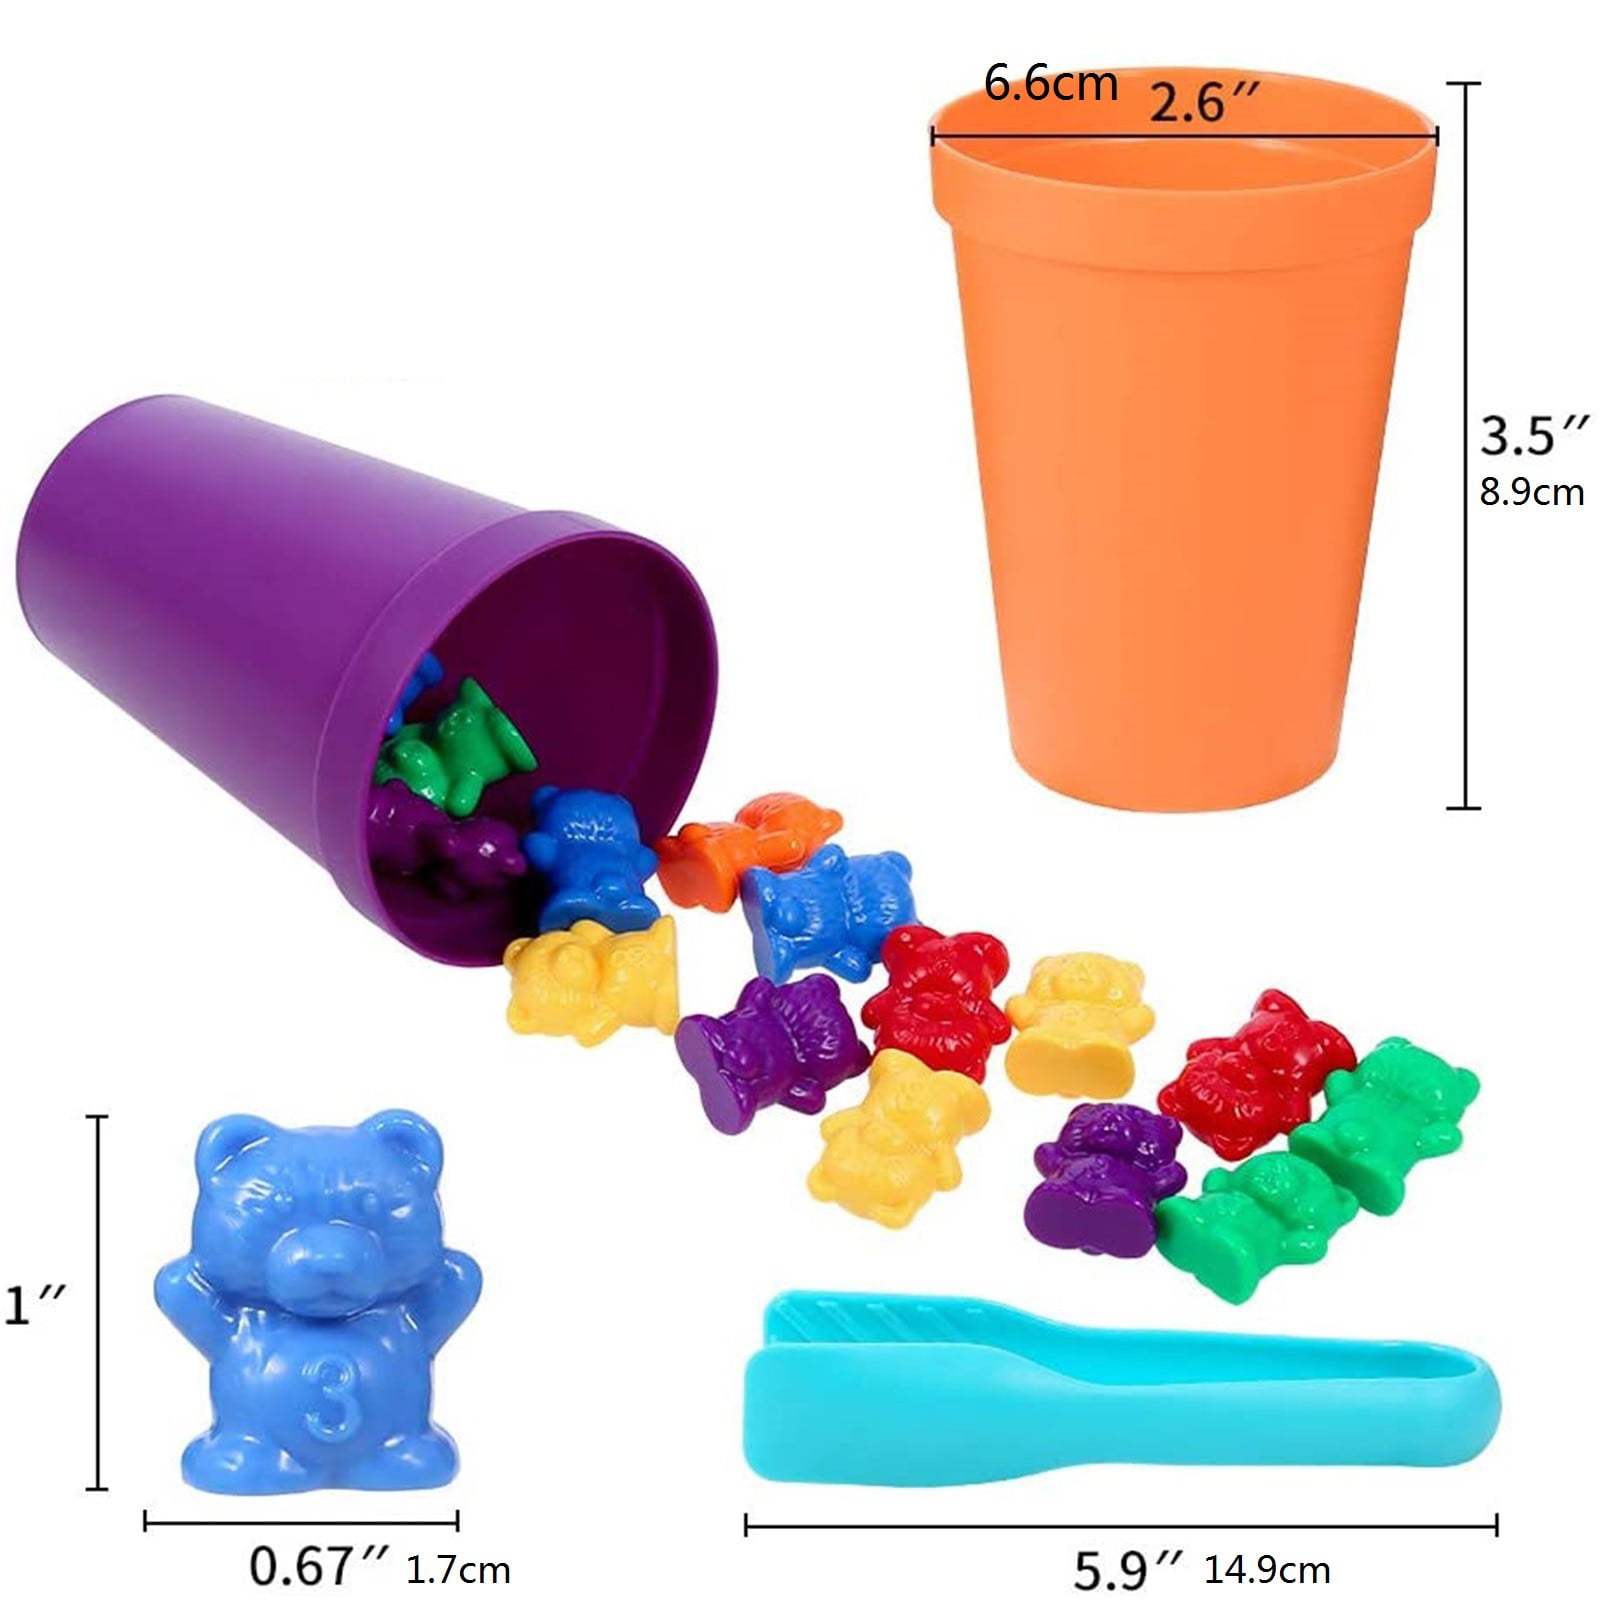 71pcs Rainbow Counting Bears Set With Matching Sorting Cups Dices and Tweezer for sale online 